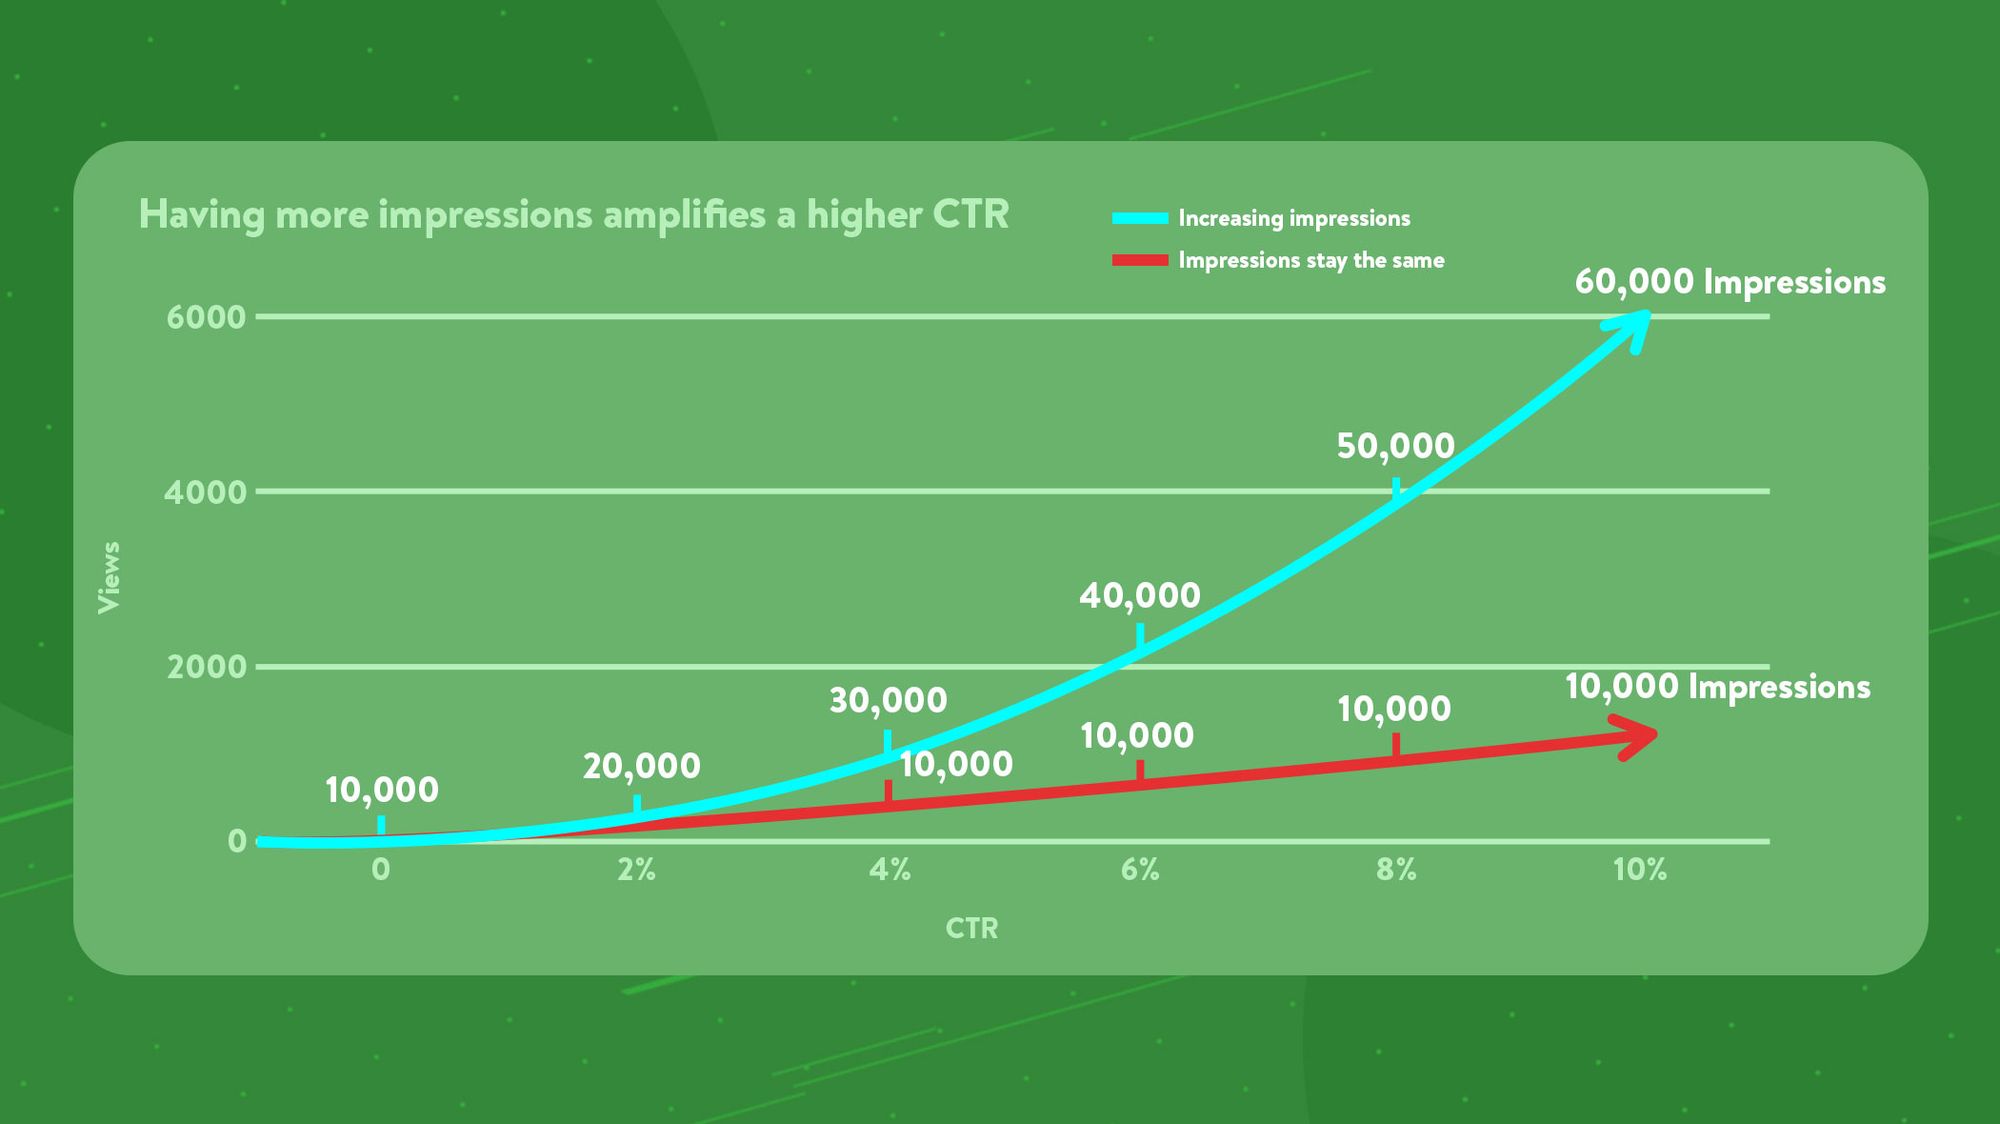 Graph showing how increasing impressions will amplify the effect of havingg a higher click-through rate.